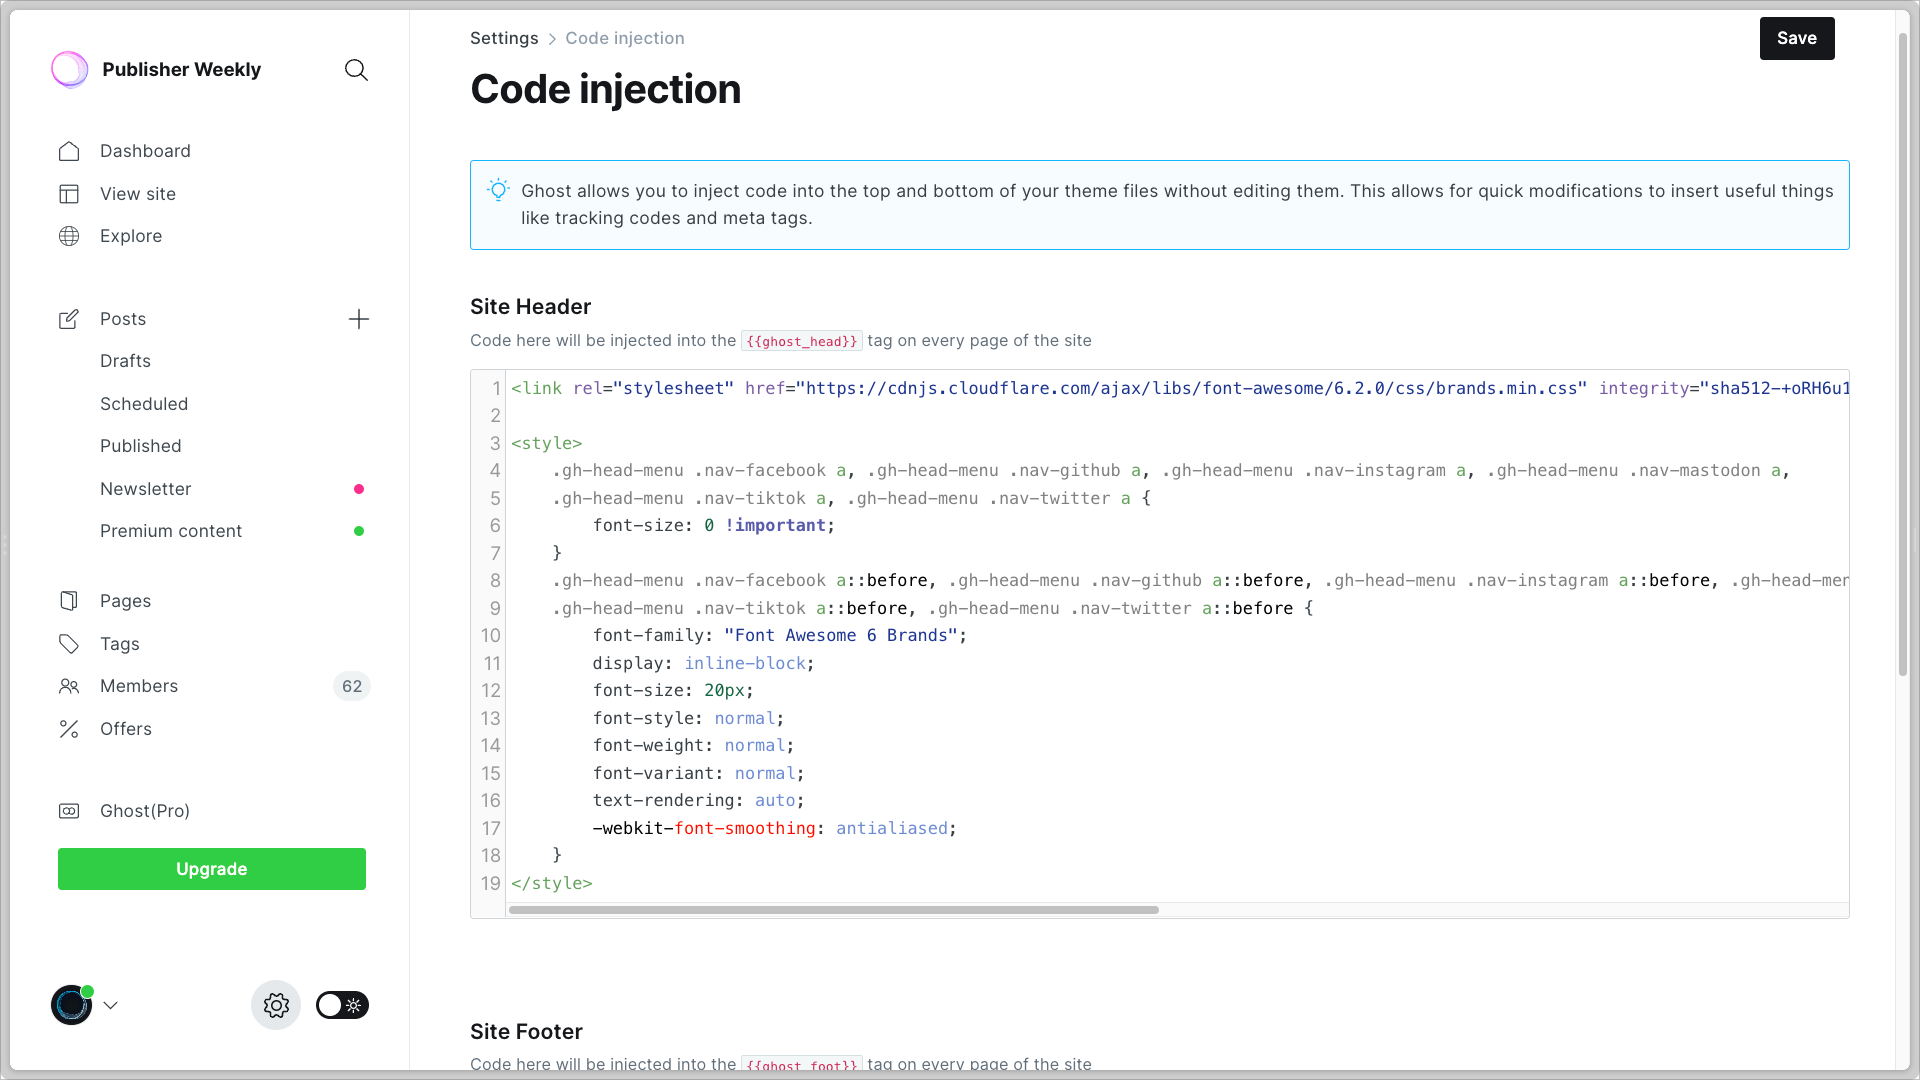 Code Injection with base styles